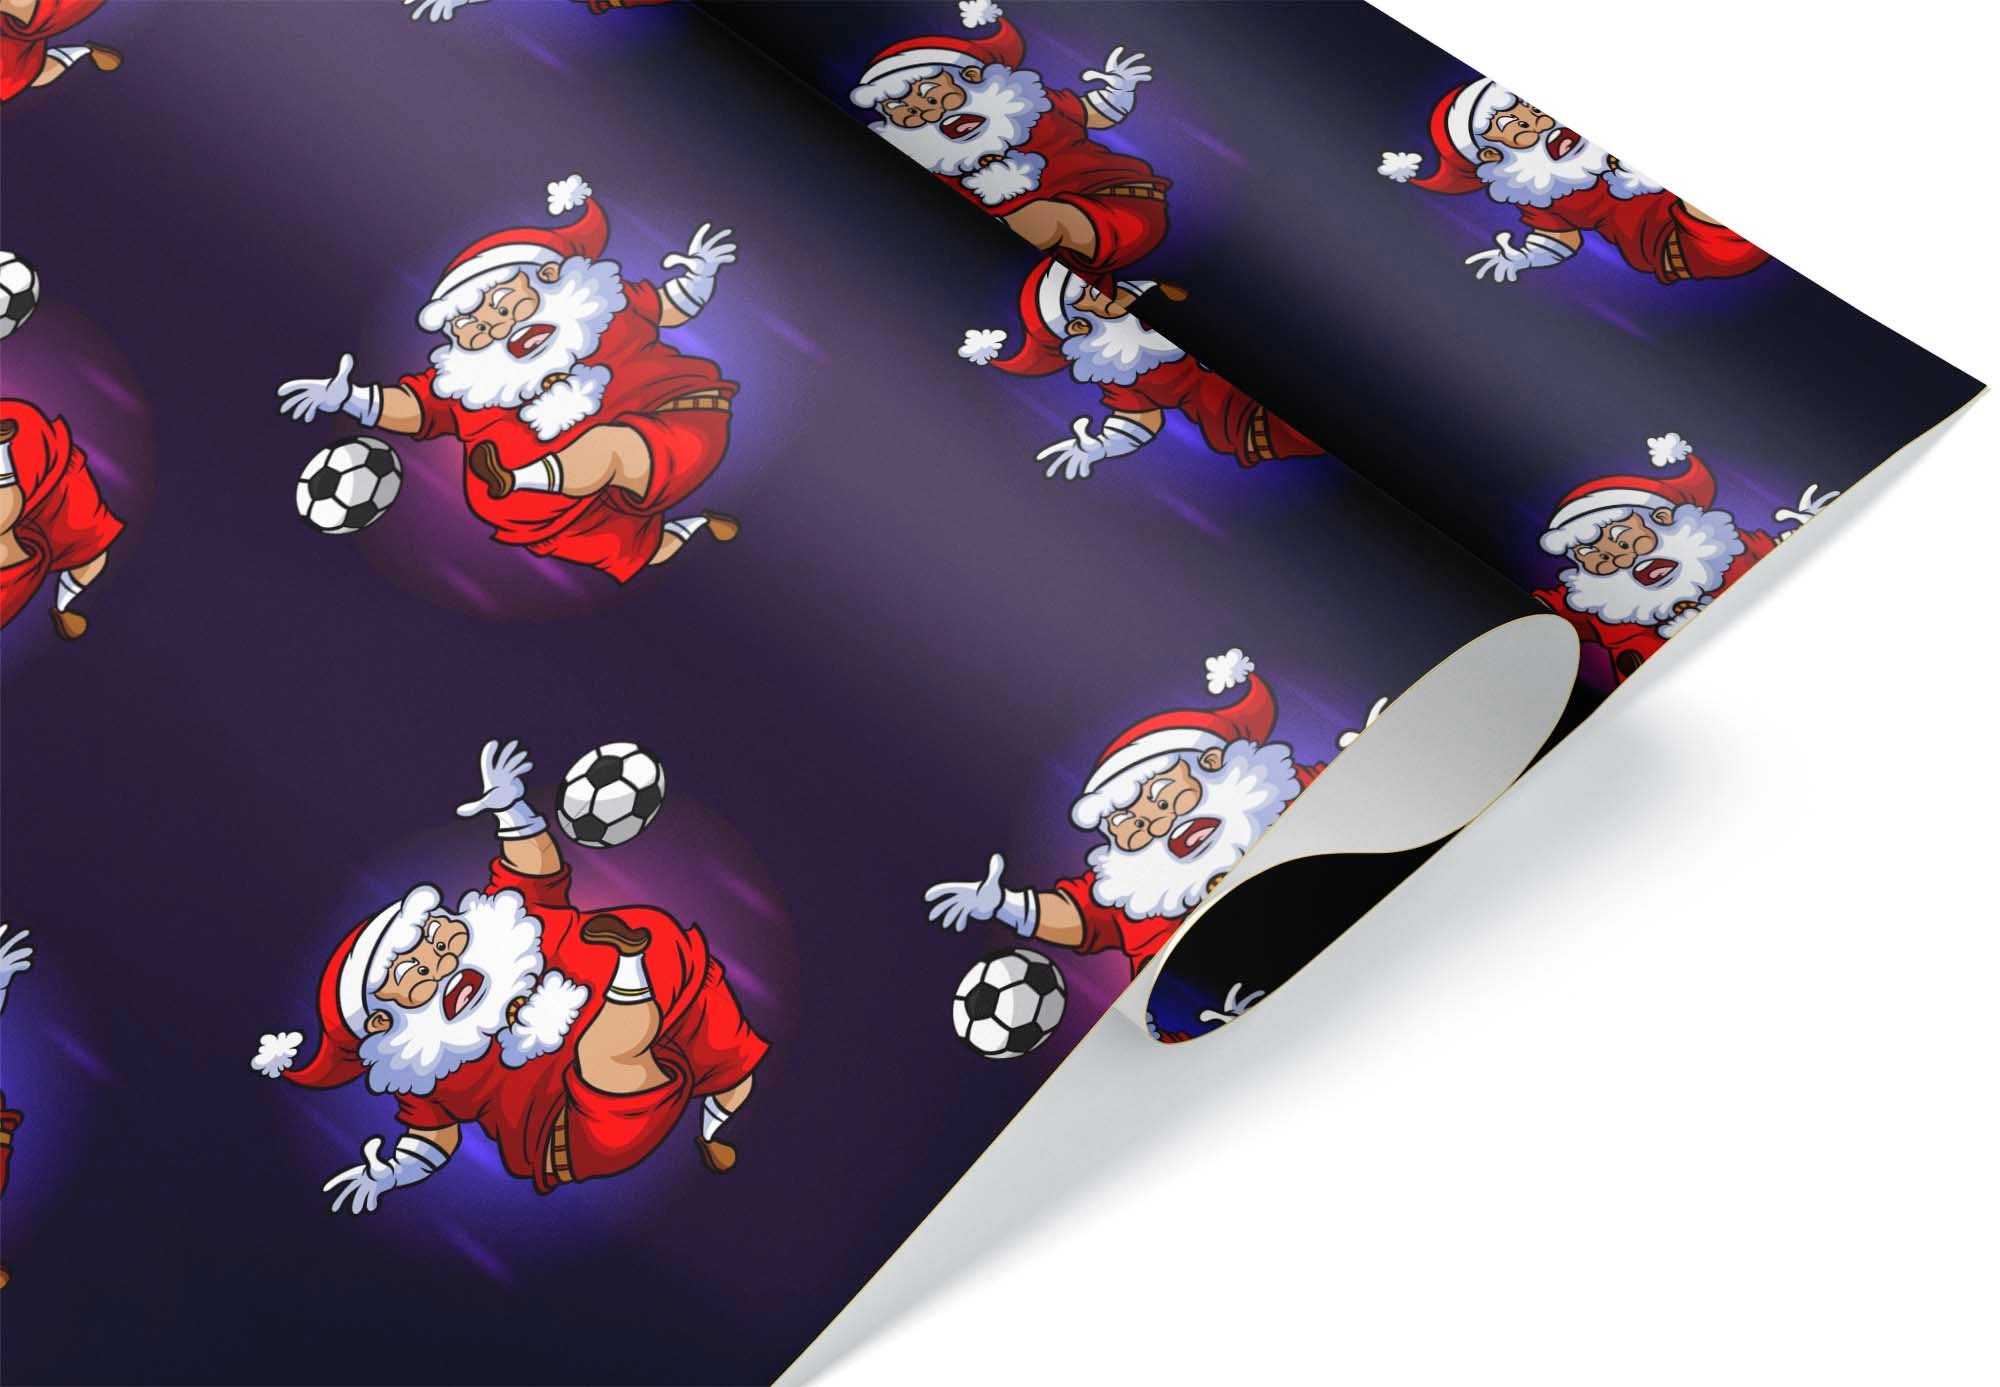 Soccer Football Balls Kids Name Red Christmas Wrapping Paper Sheets